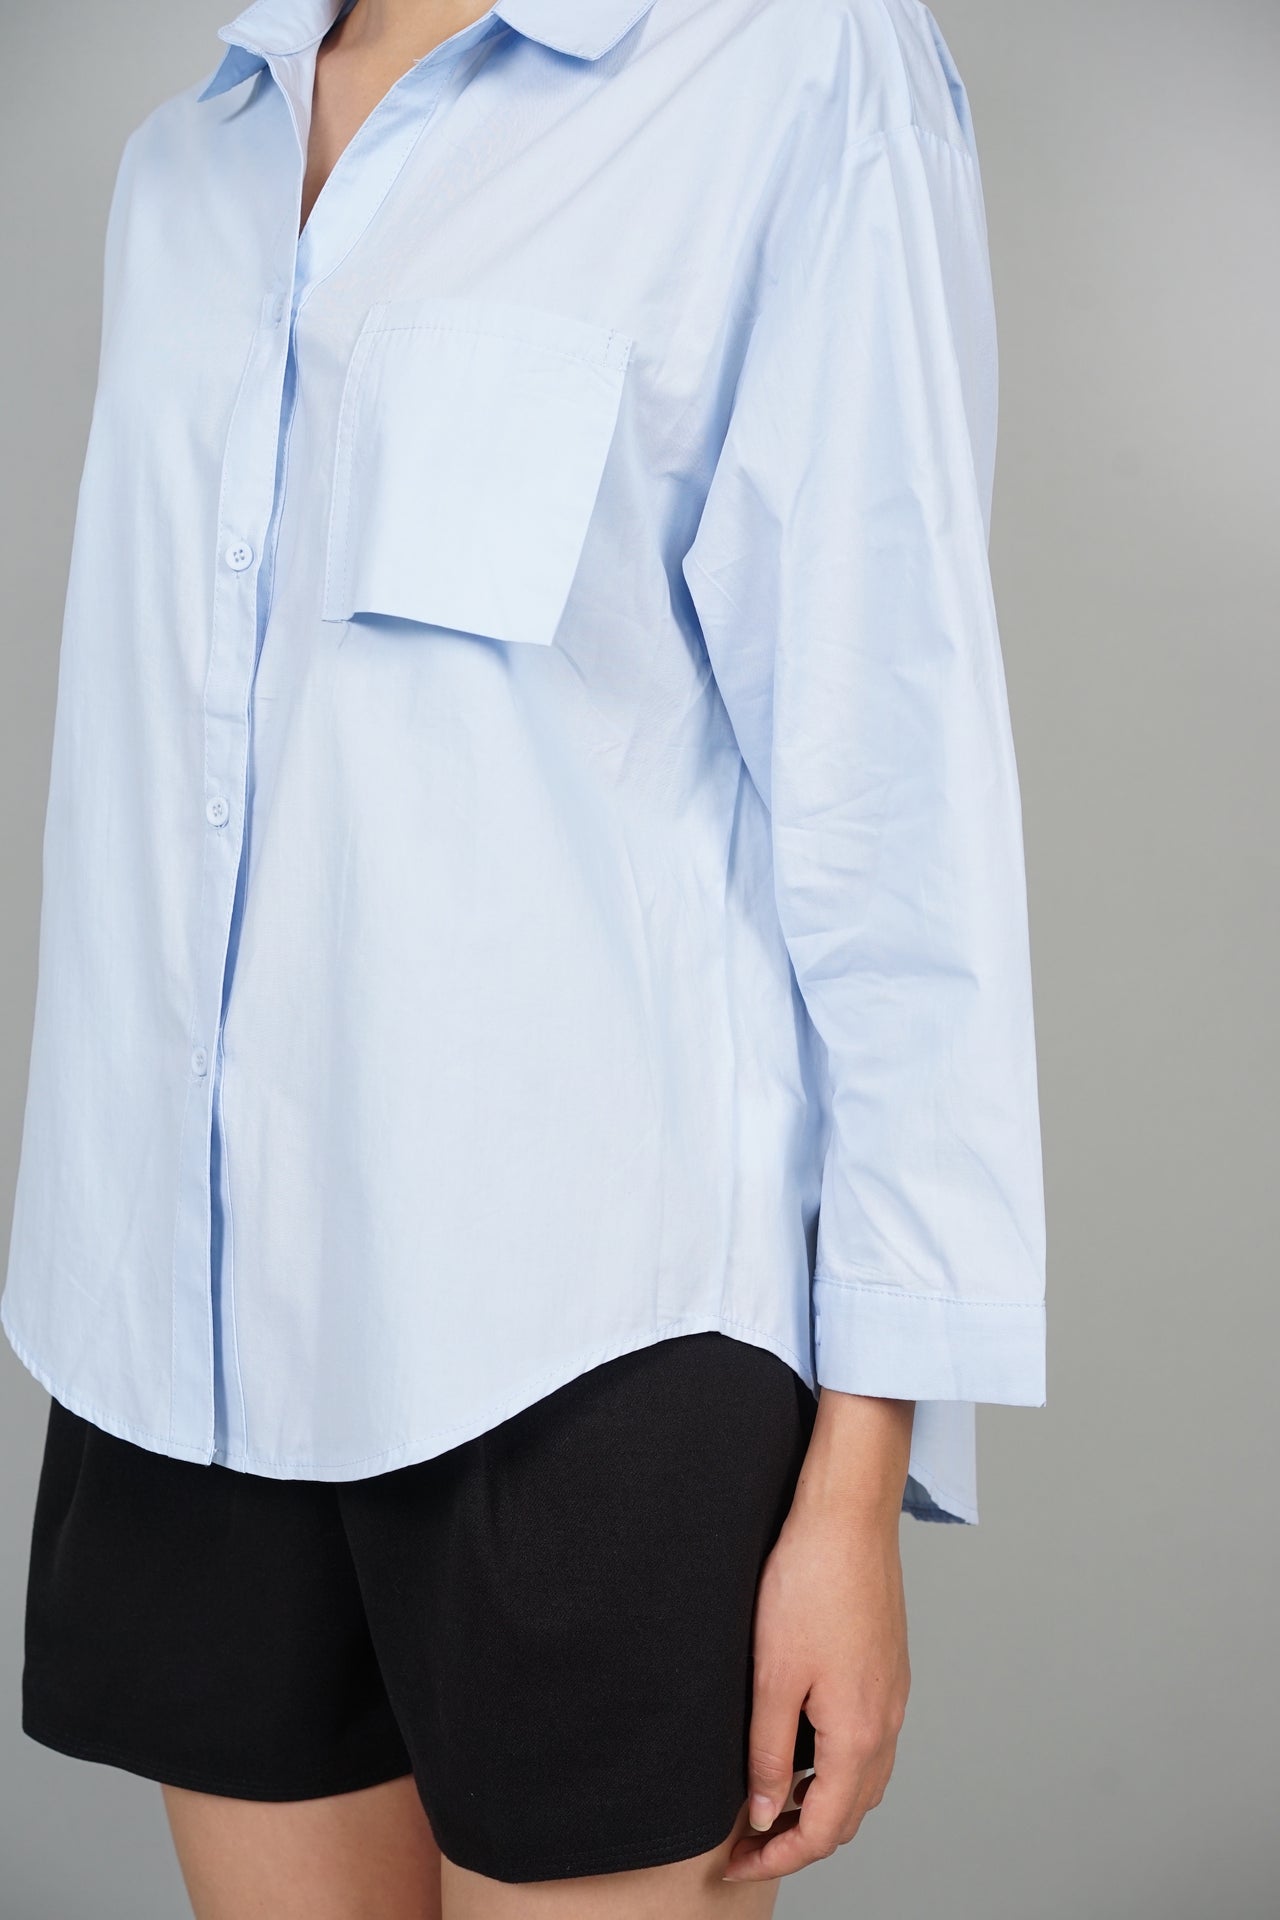 EVERYDAY / Rocco Buttoned Shirt in Blue